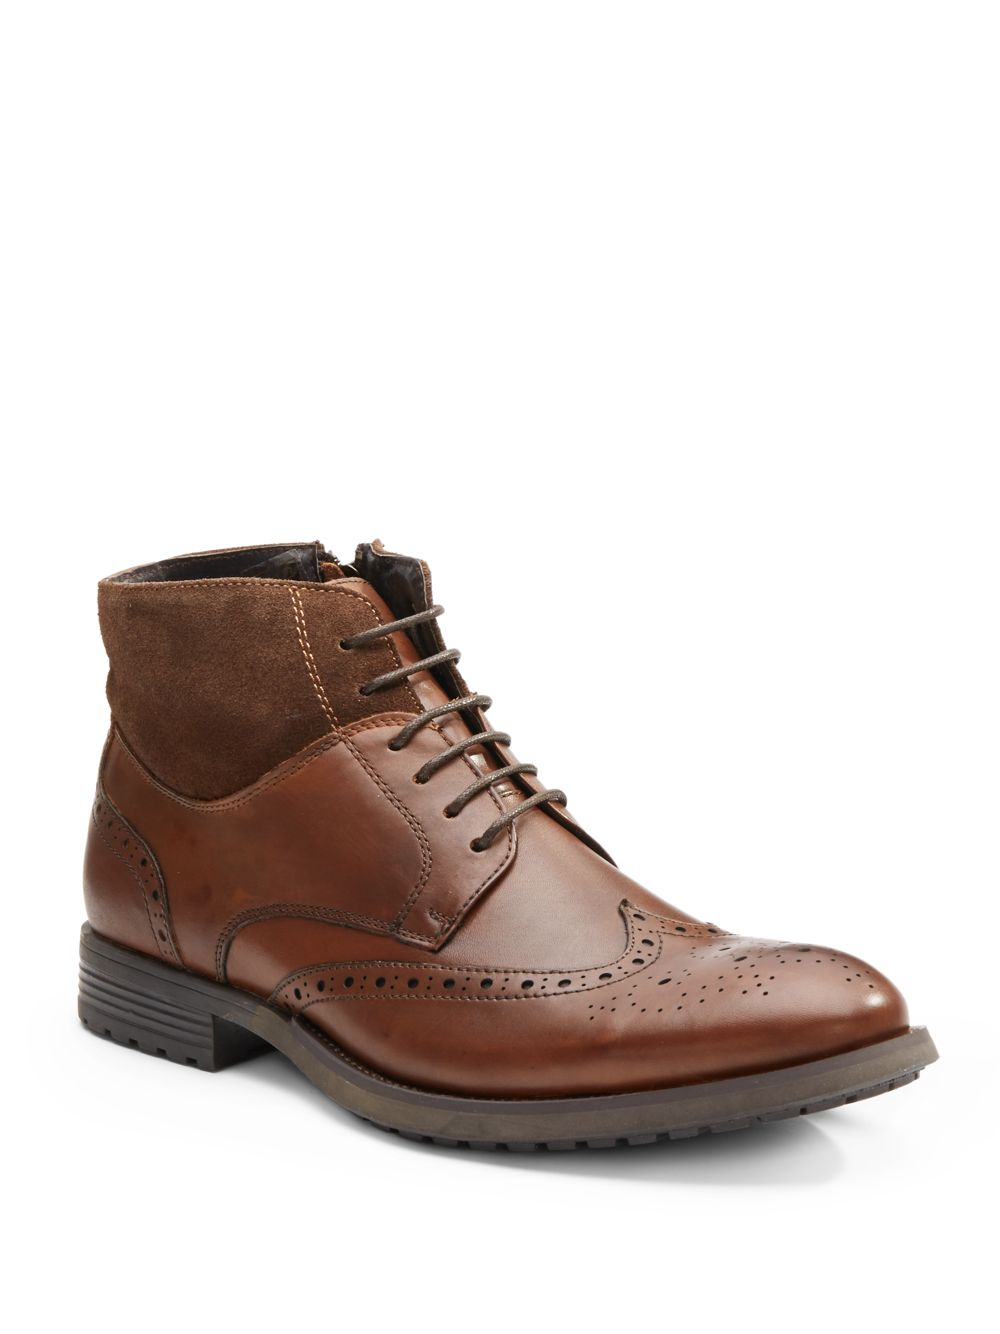 Lyst - Vince Camuto Dario Leather & Suede Wingtip Boots in Brown for Men